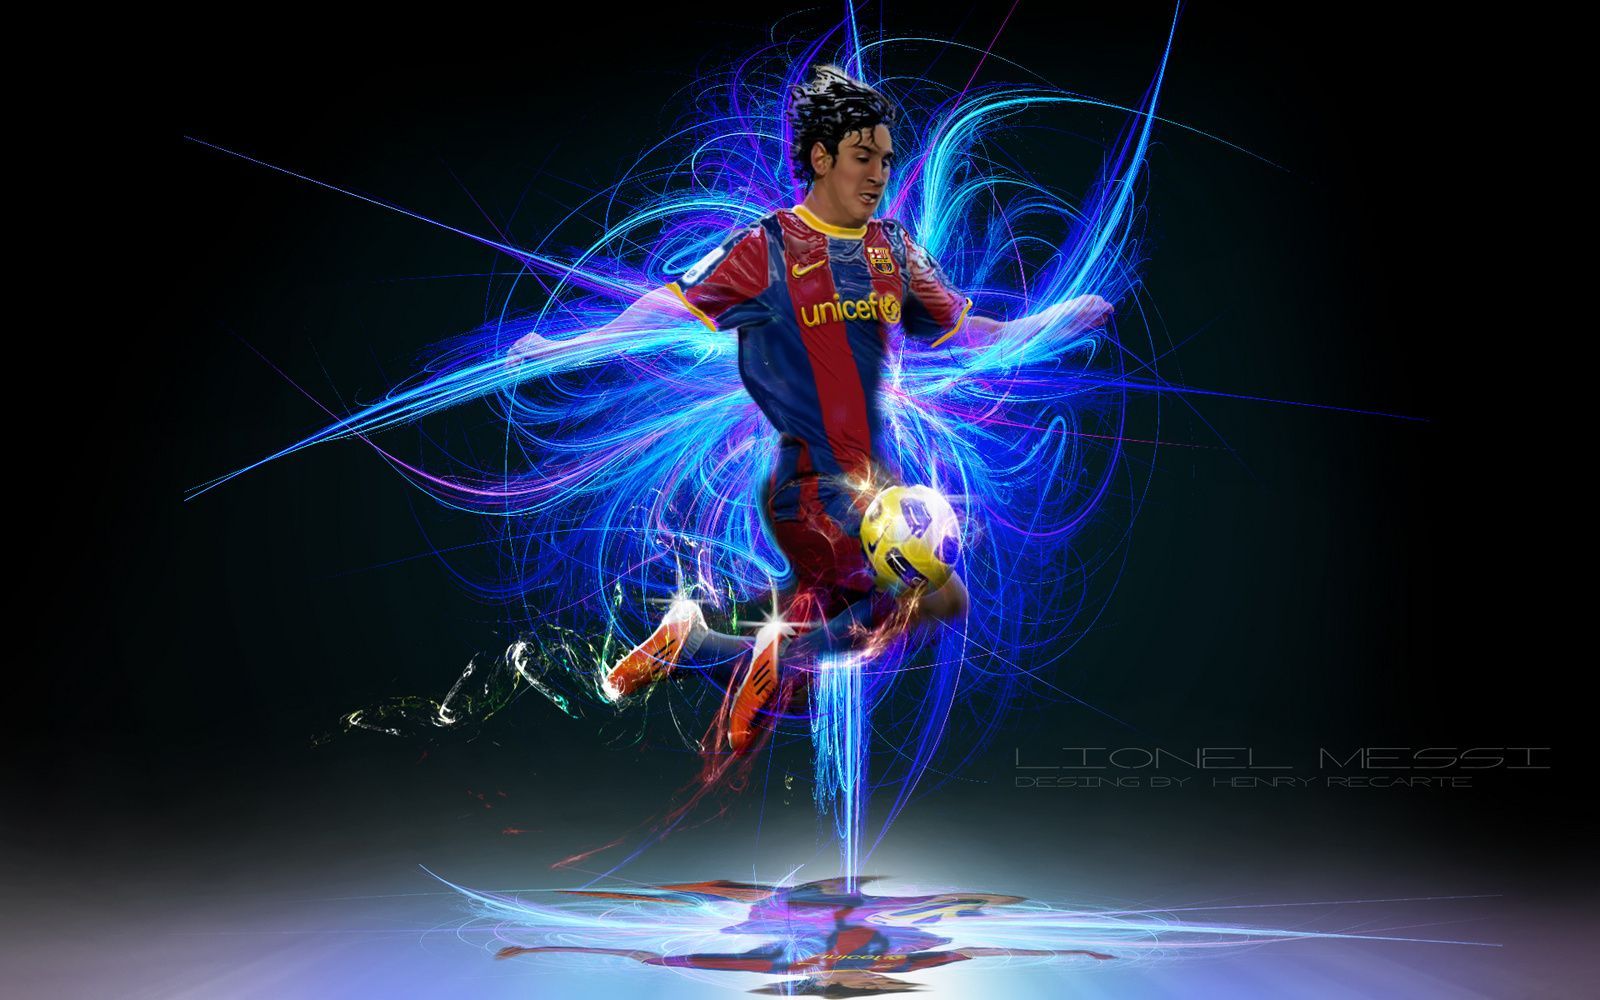 CapCut thegoat soccer messi messiking viral fyp foryoupage  messi  wallpaper  TikTok